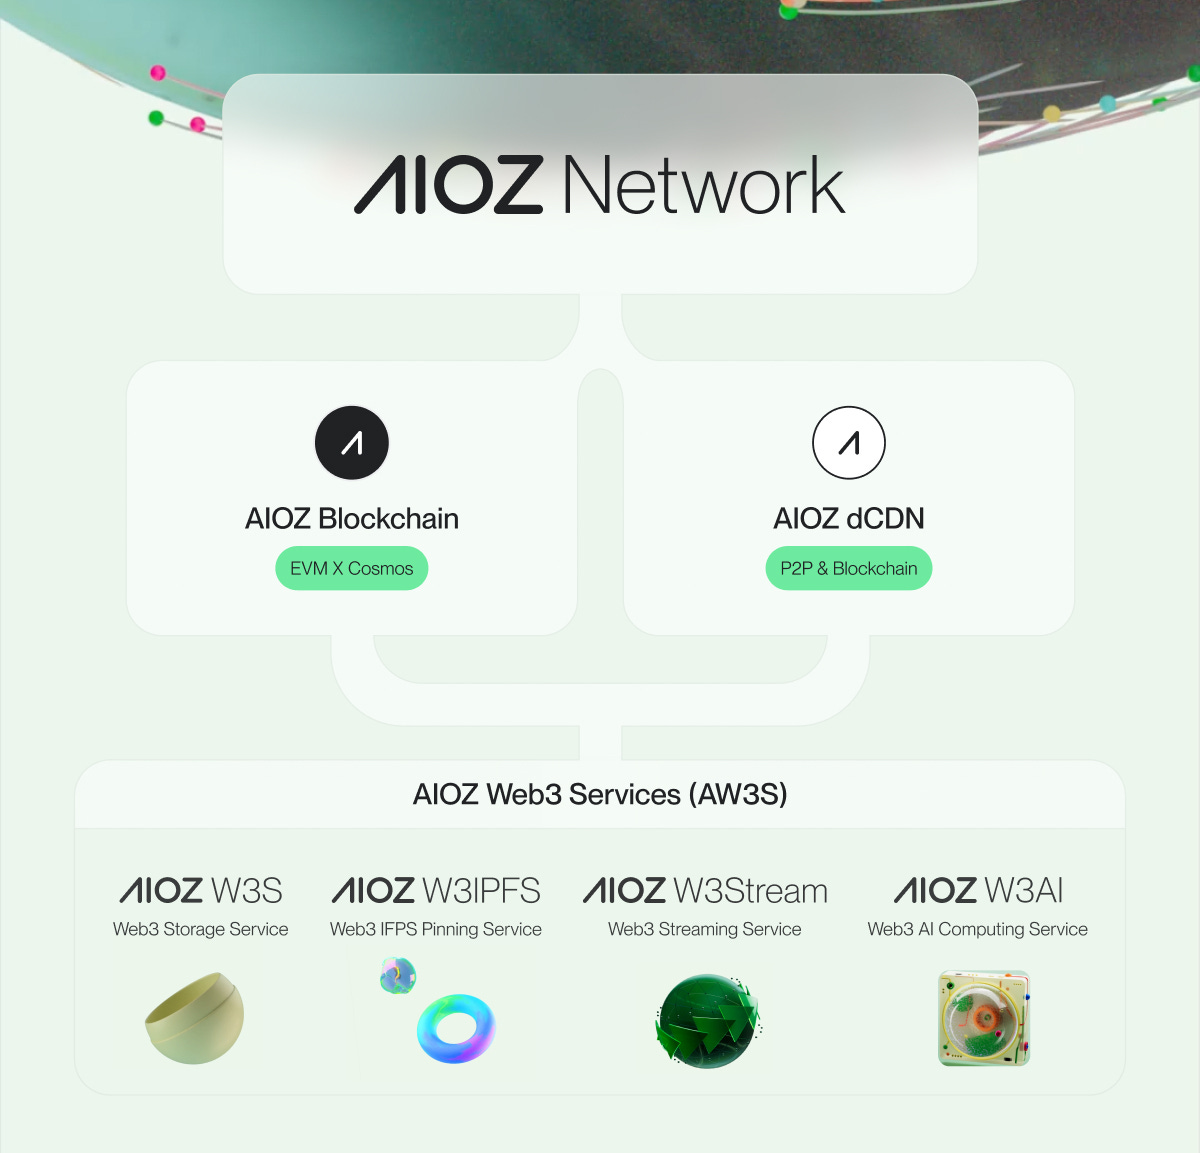 Welcome to the AIOZ Network